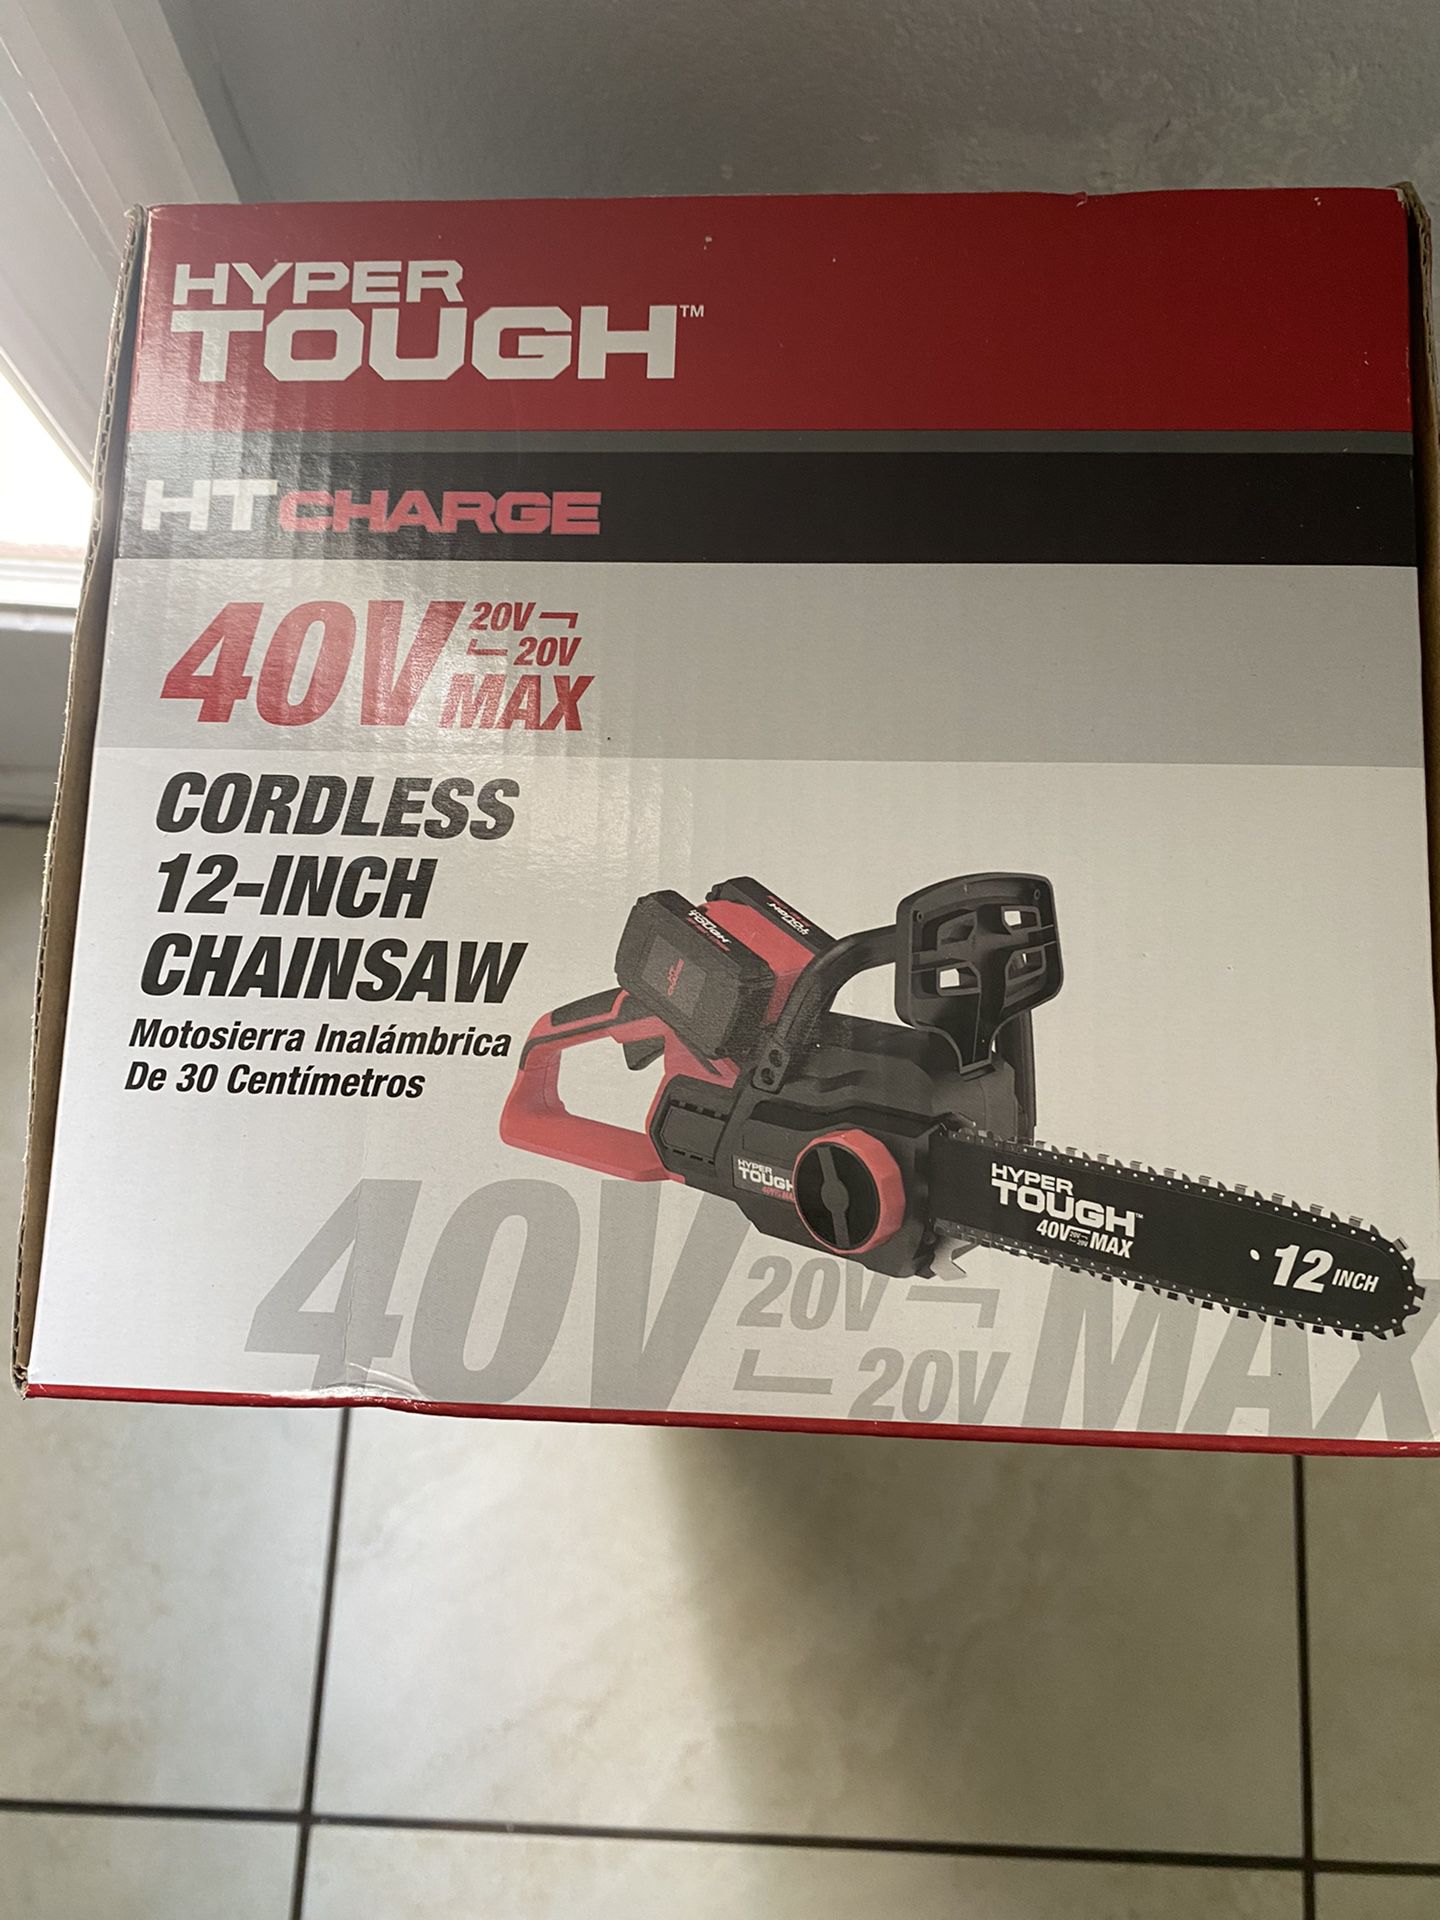 Hyper thought 40v 12” cordless chainsaw